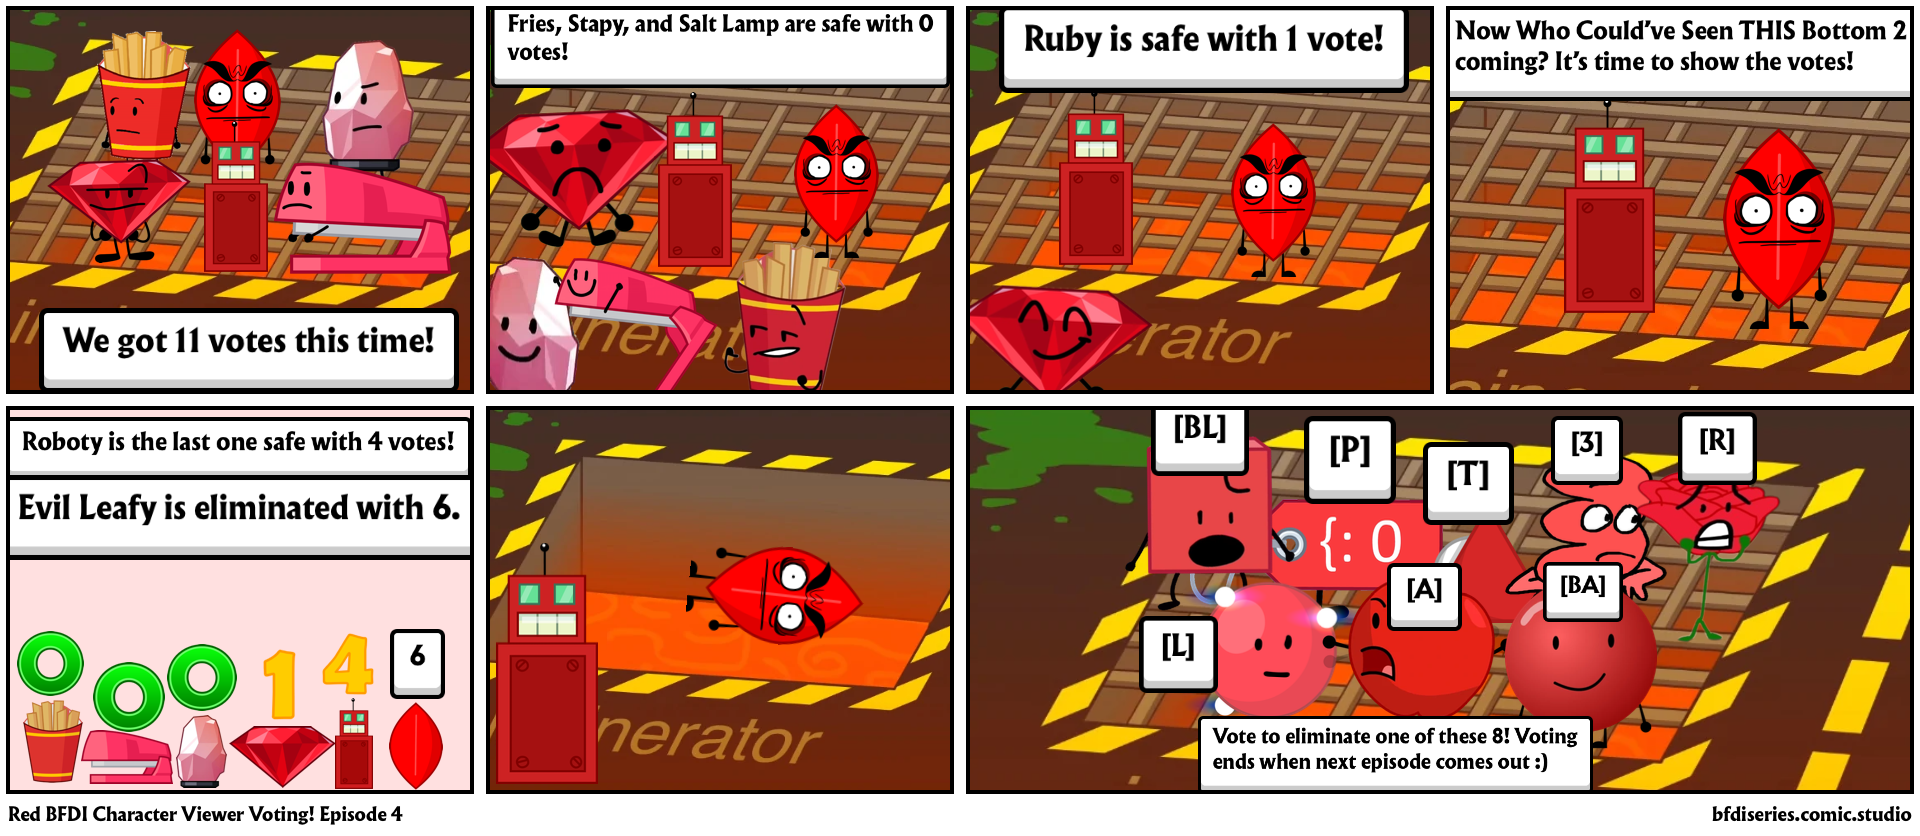 Red BFDI Character Viewer Voting! Episode 4